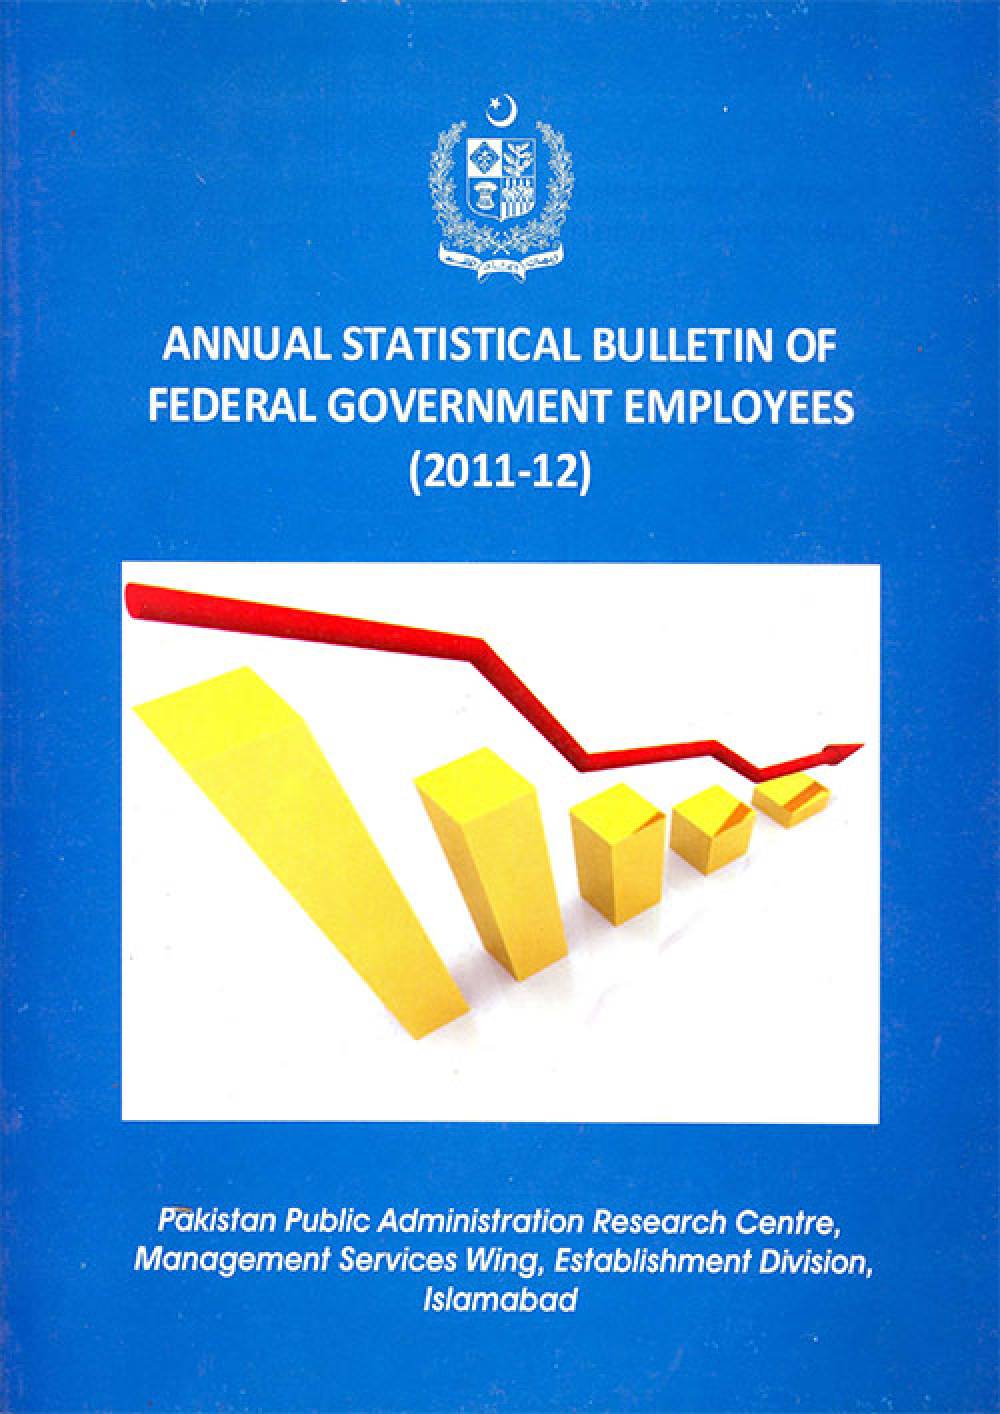 Annual Statistical Bulletin of Federal Government Employees 2011-12